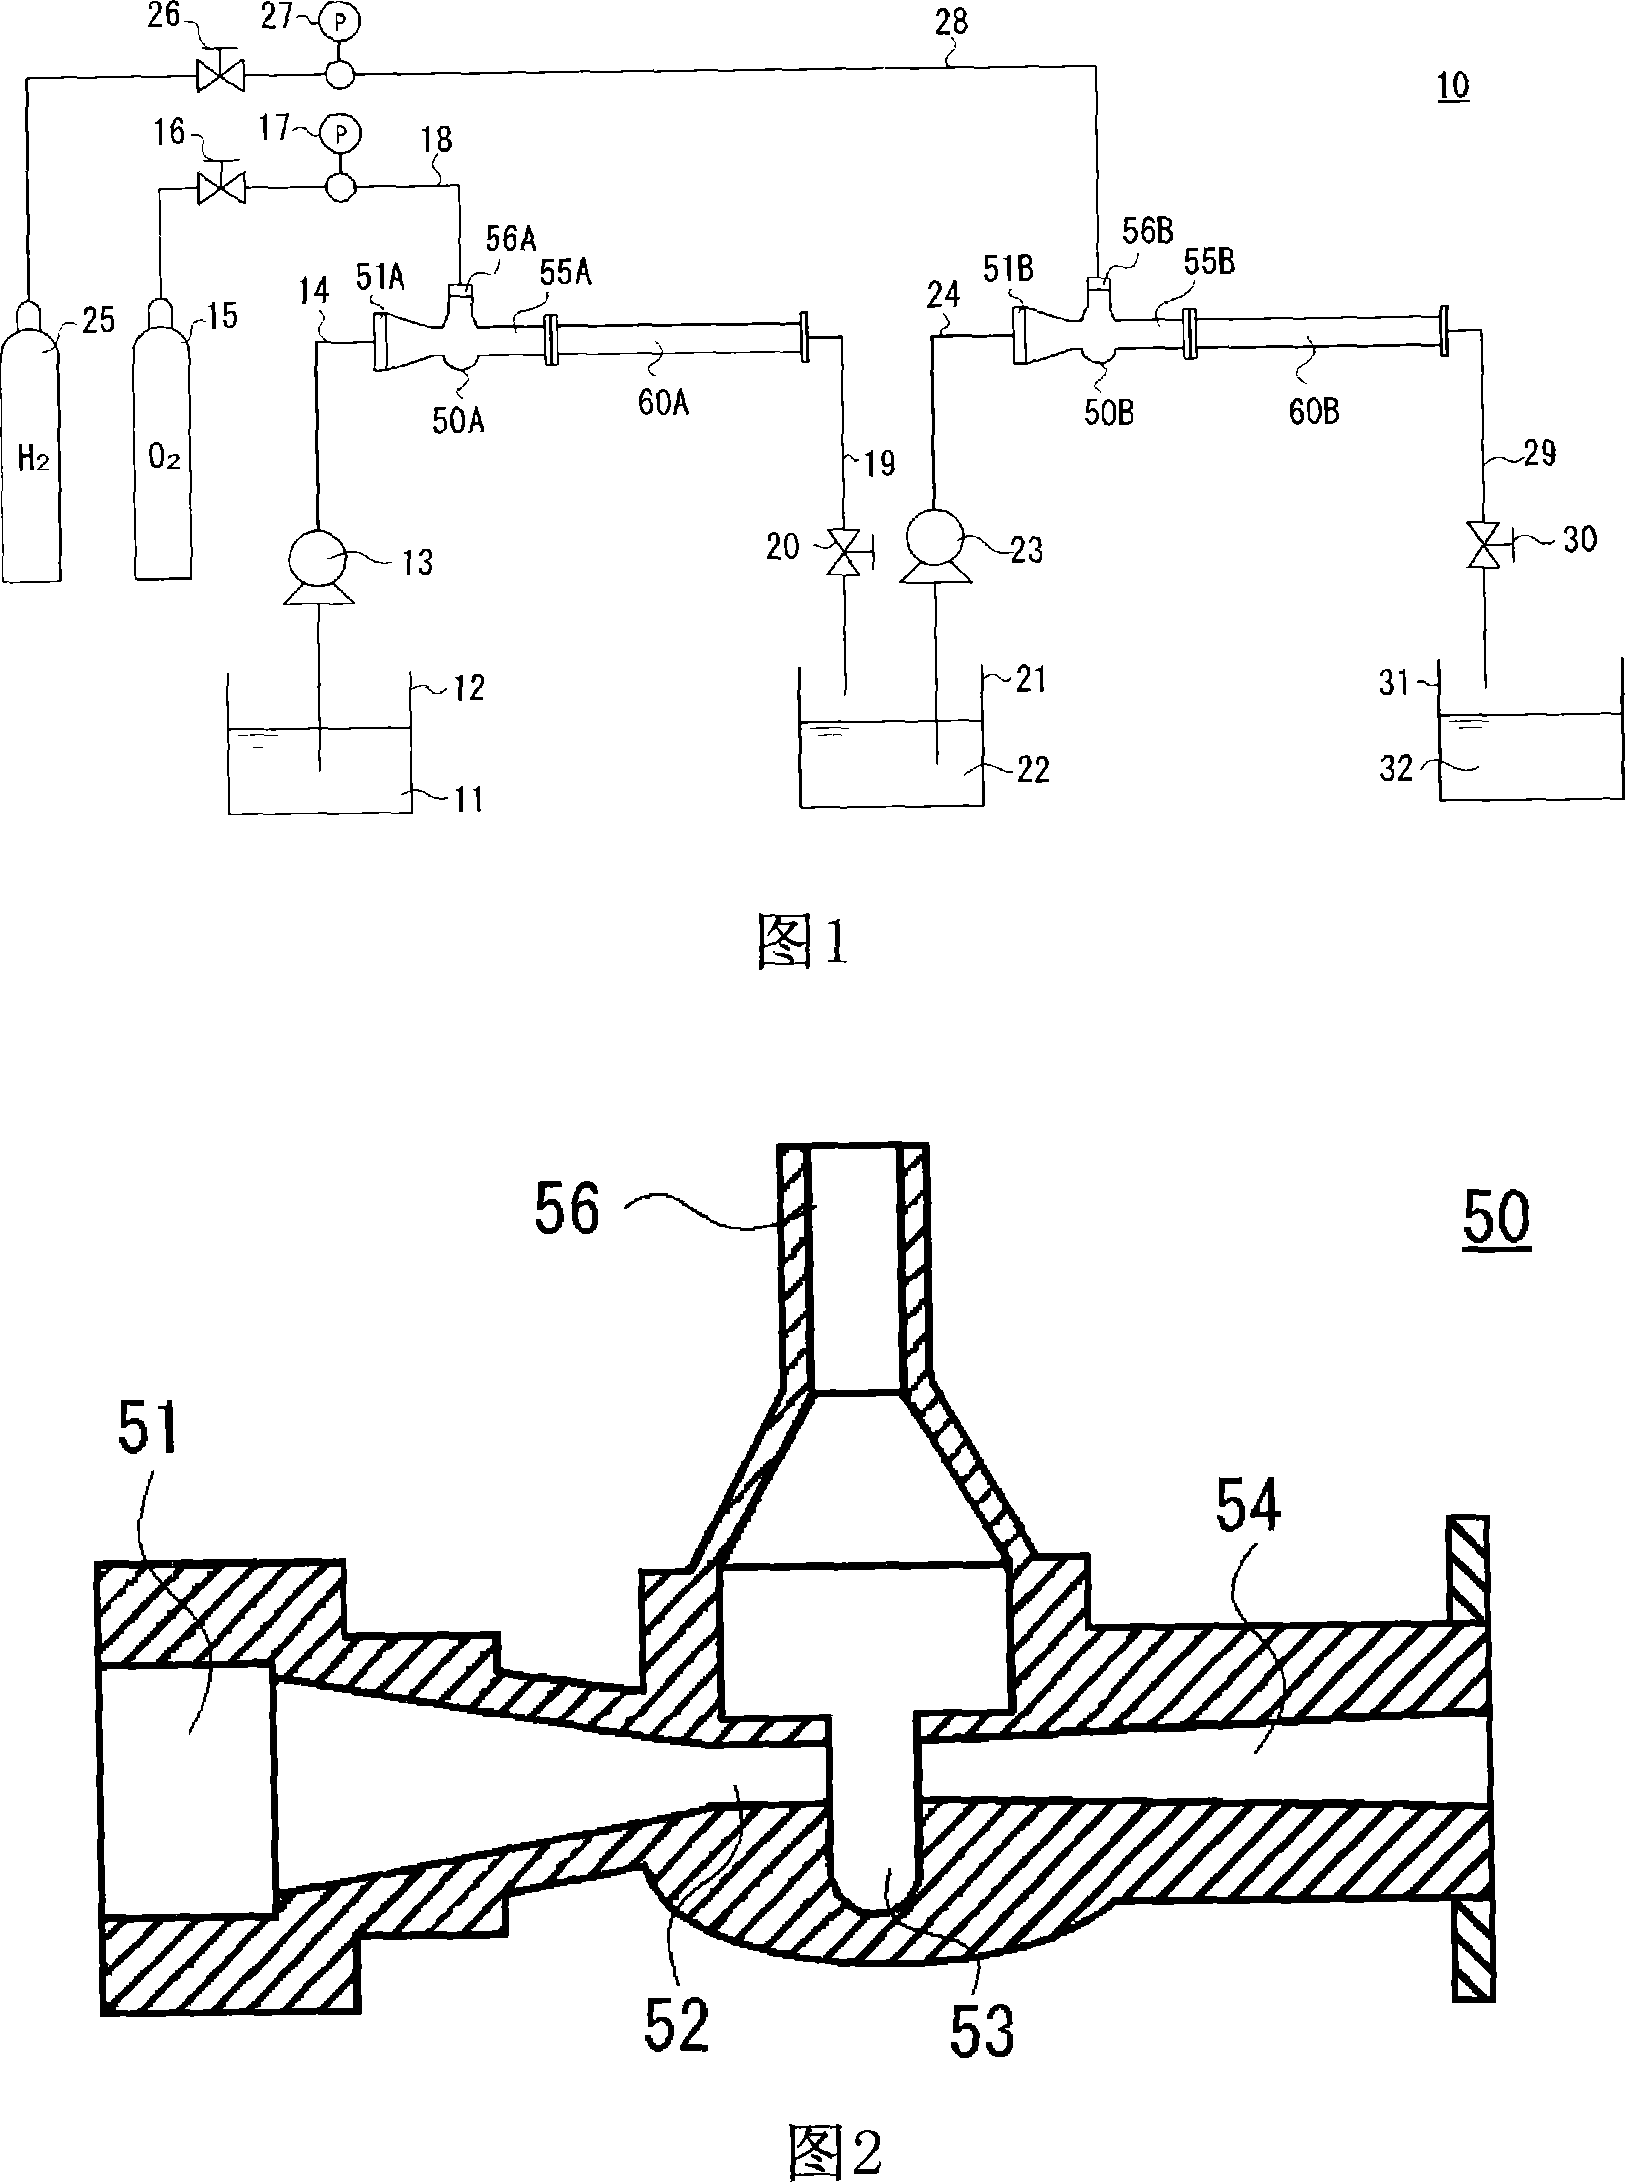 Method and apparatus for producing oxygen-containing reducing aqueous beverage